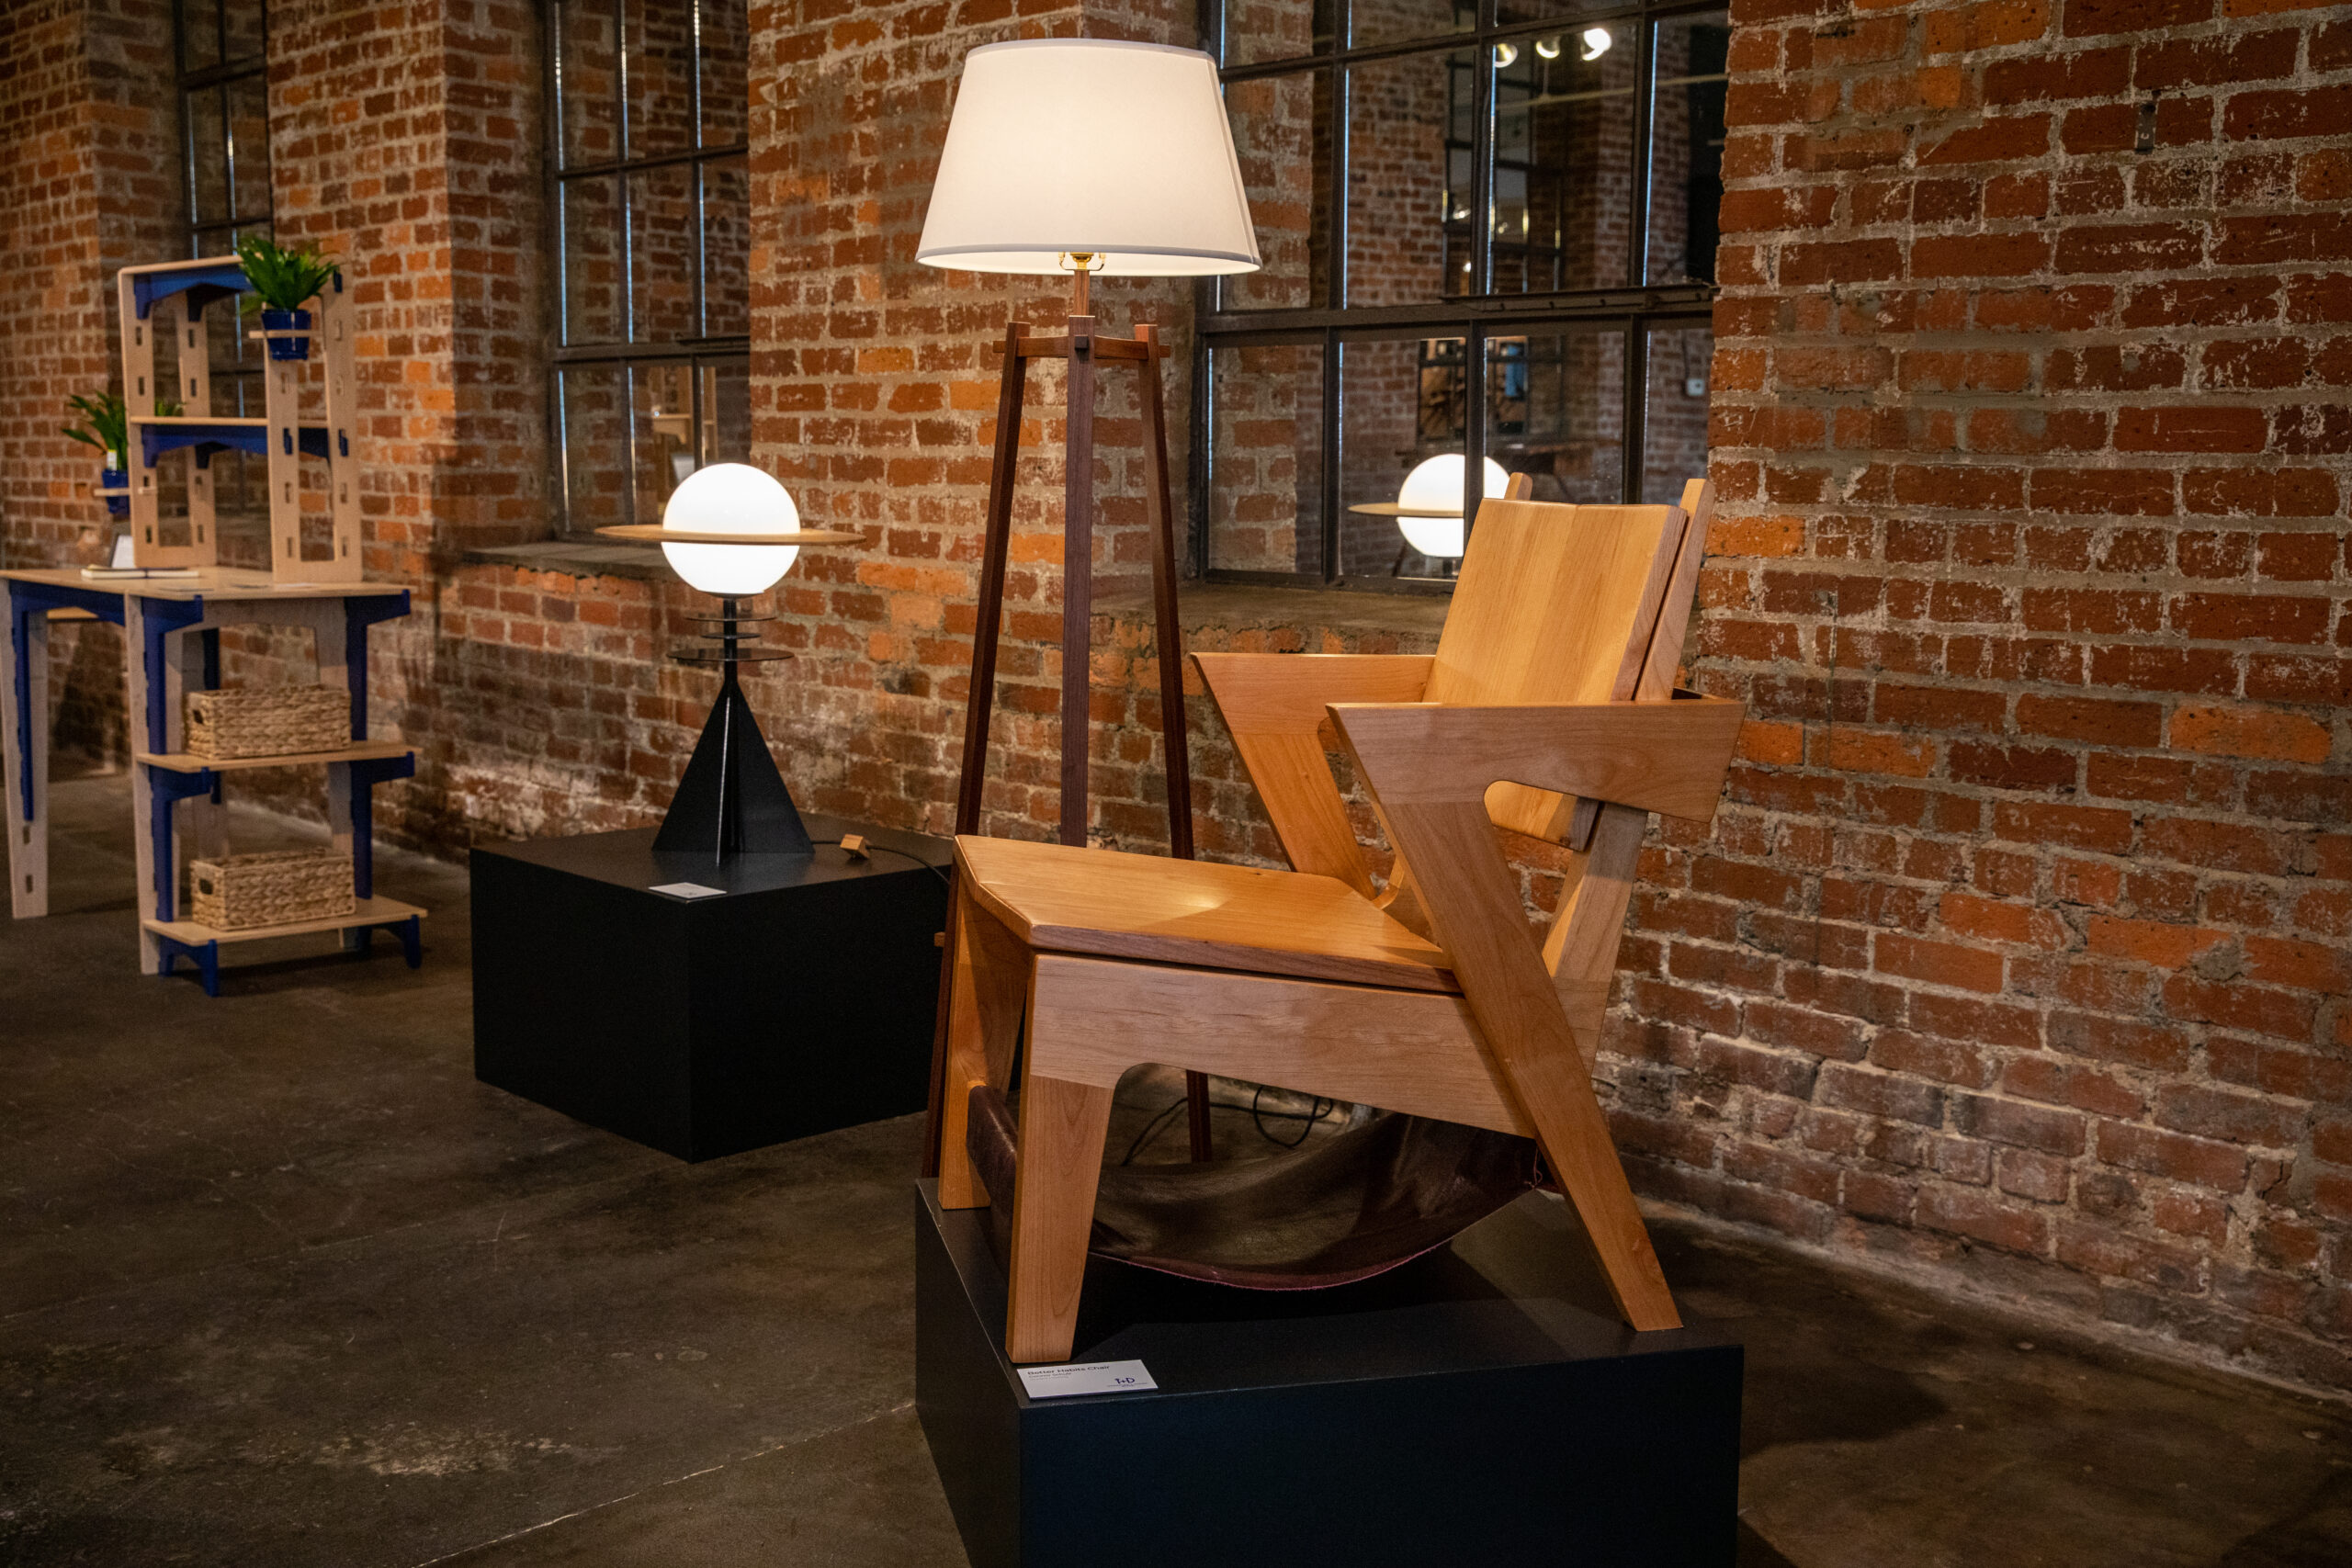 A chair and lamp – two entries in the ISFD Innovation+Design competition.